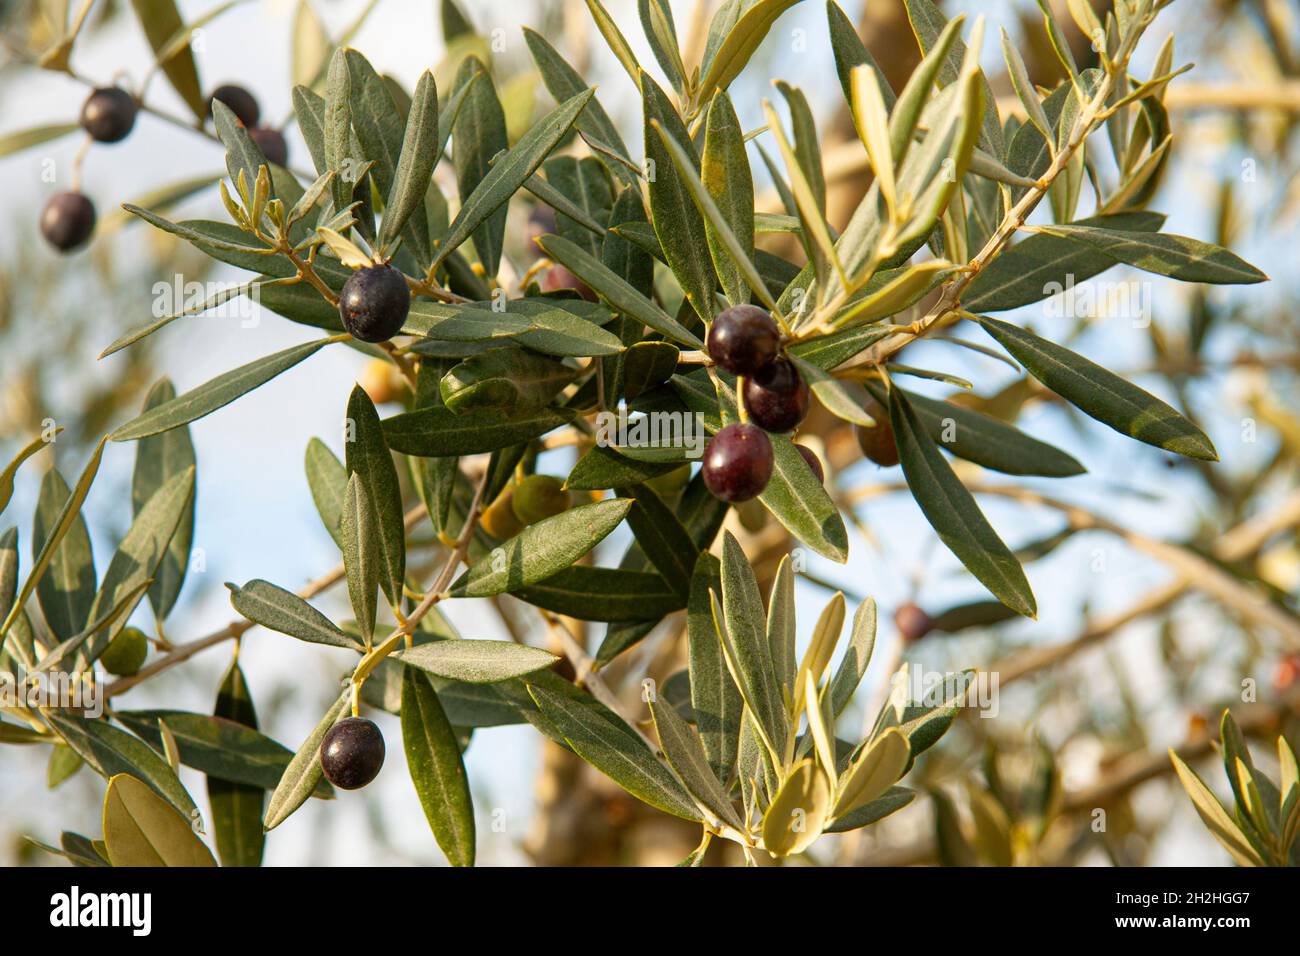 Ripe olives growing on olive tree in the Mediterranean, southern Europe. Close up black olive fruit on tree branch, Healthy vegetarian food. Stock Photo